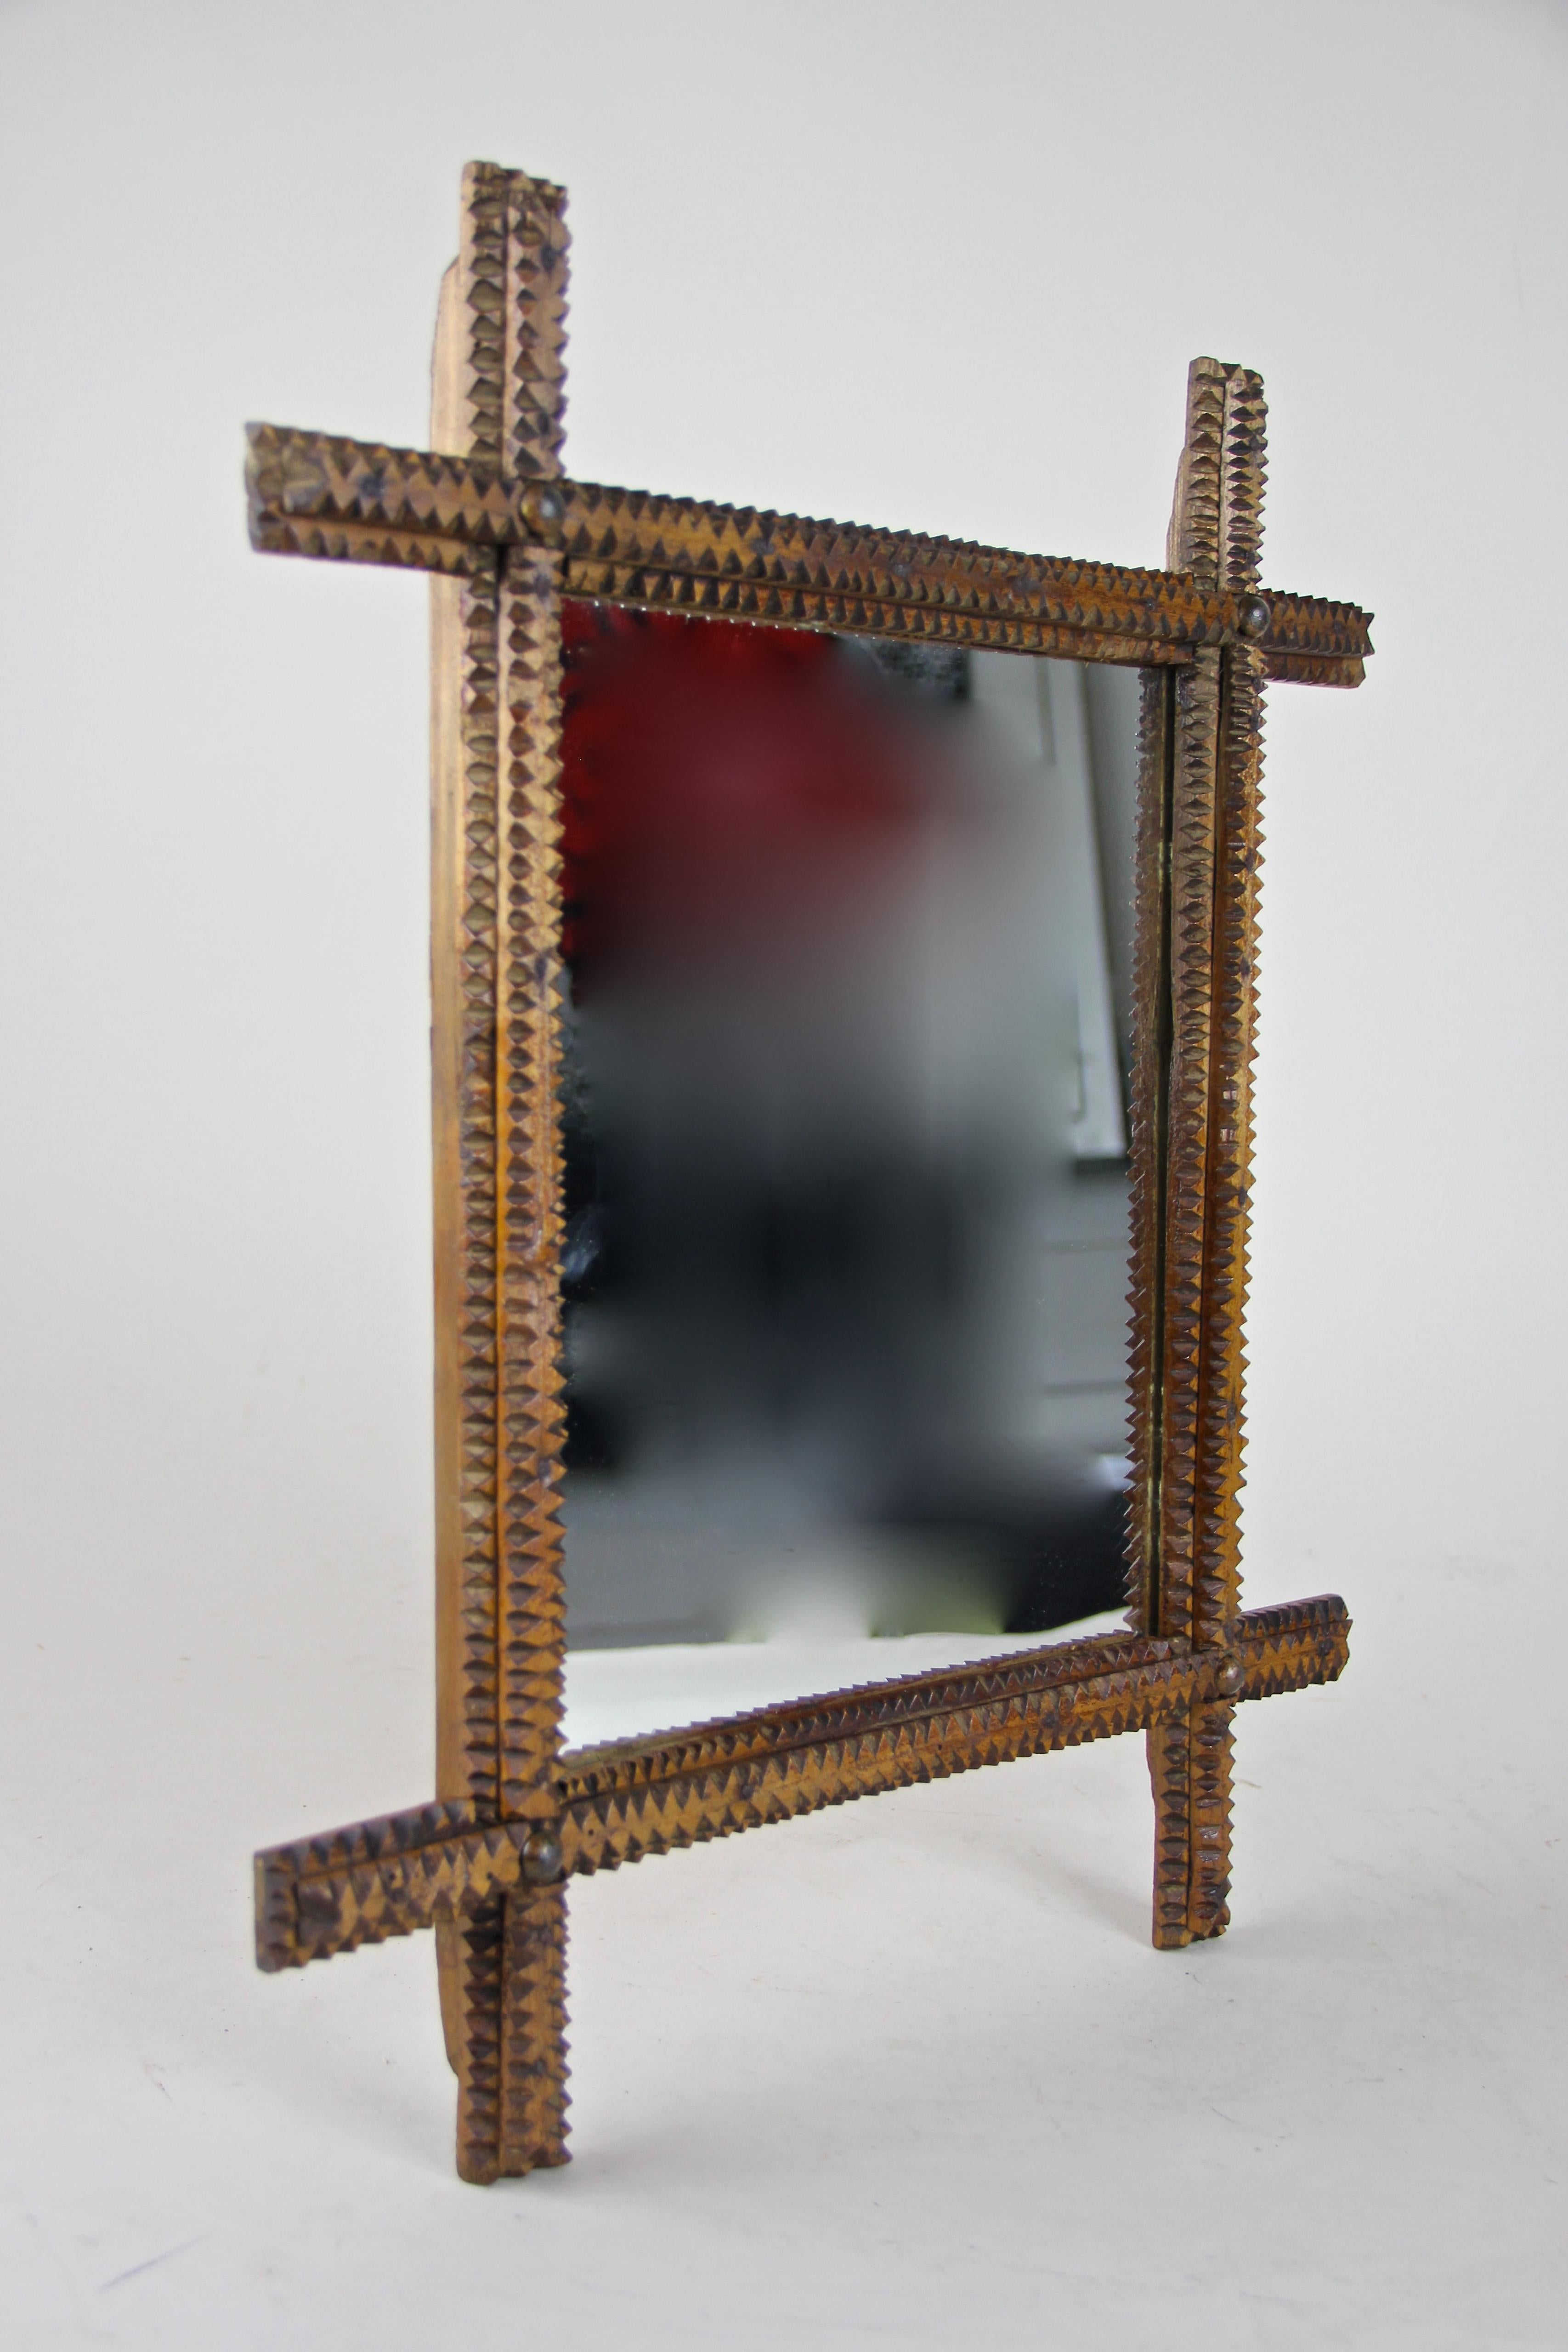 Lovely hand carved rustic wall mirror in beautiful Tramp Art design from Austria circa 1870. This late 19th century wooden mirror comes with a classical shape showing overhanging corners and a rough carved surface. Typical, or let’s say better -